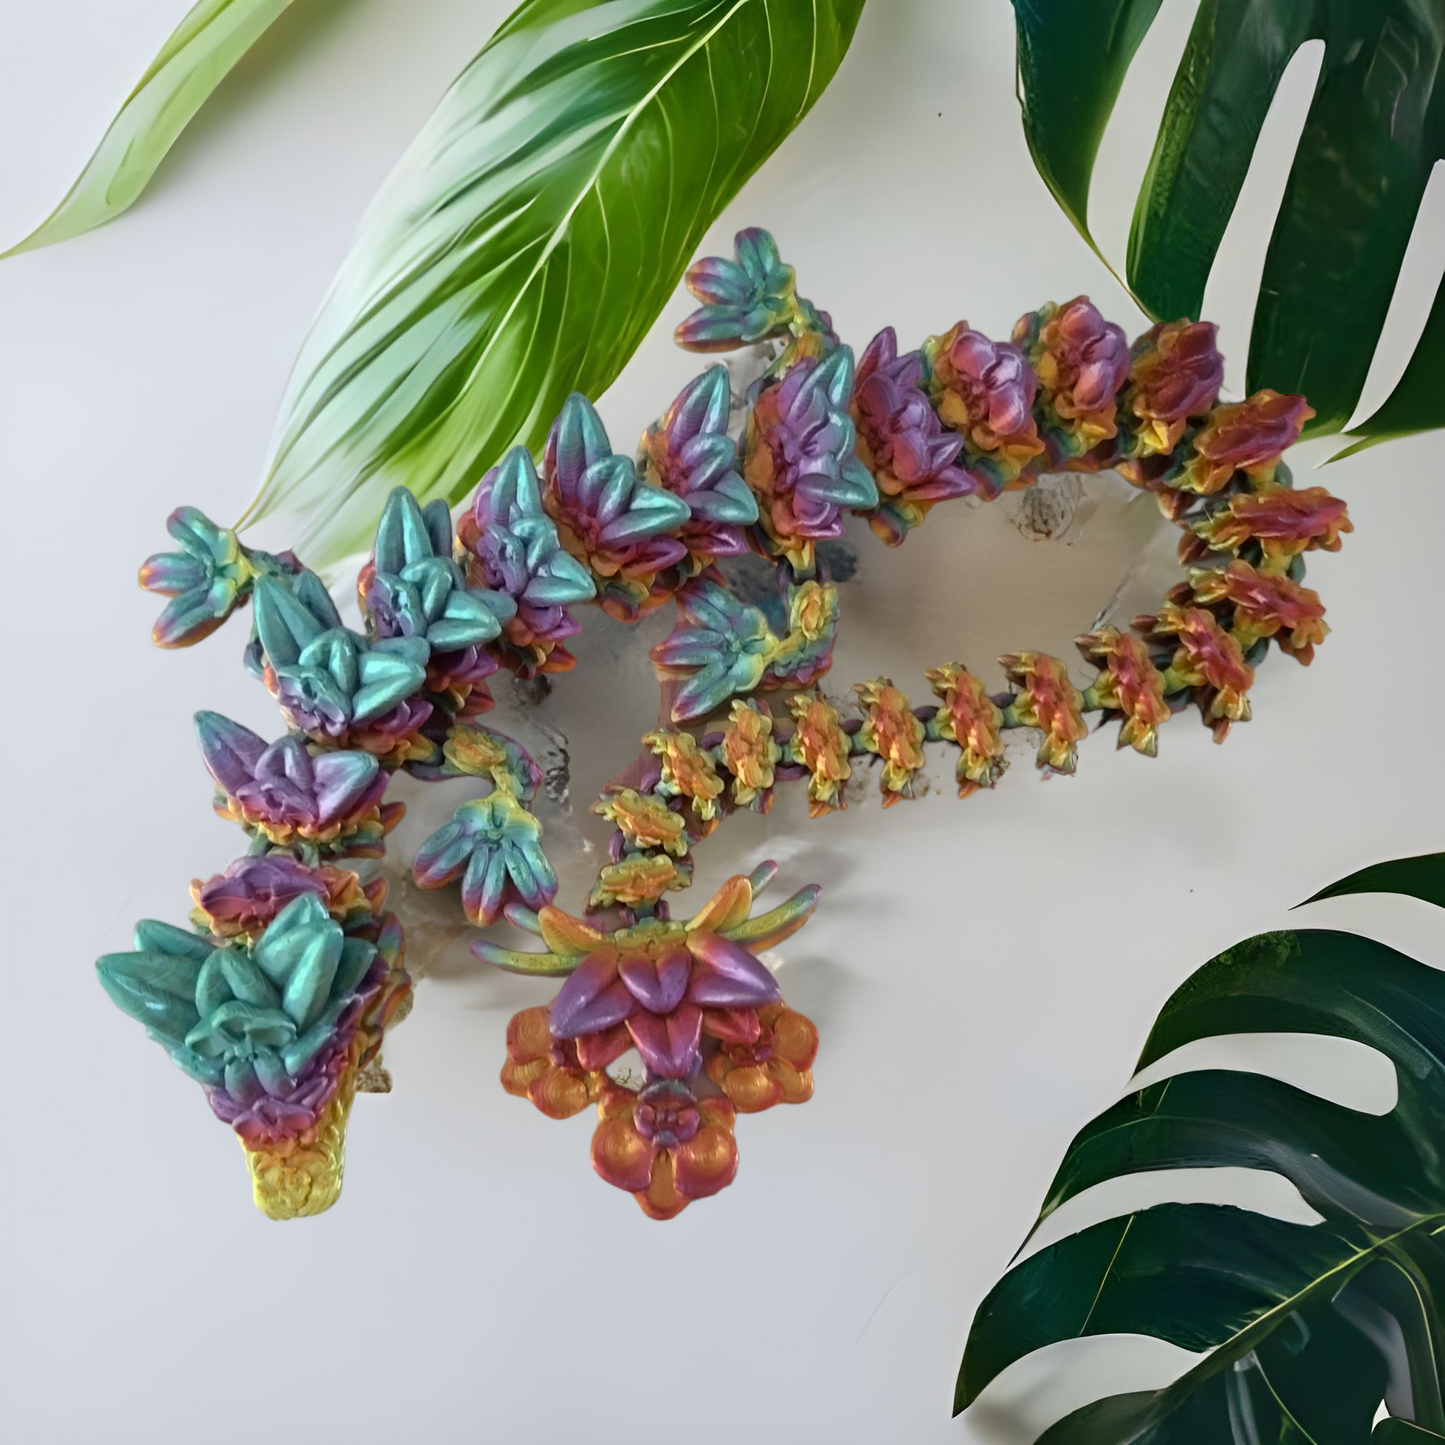 3D Printed Articulated Orchid Dragon